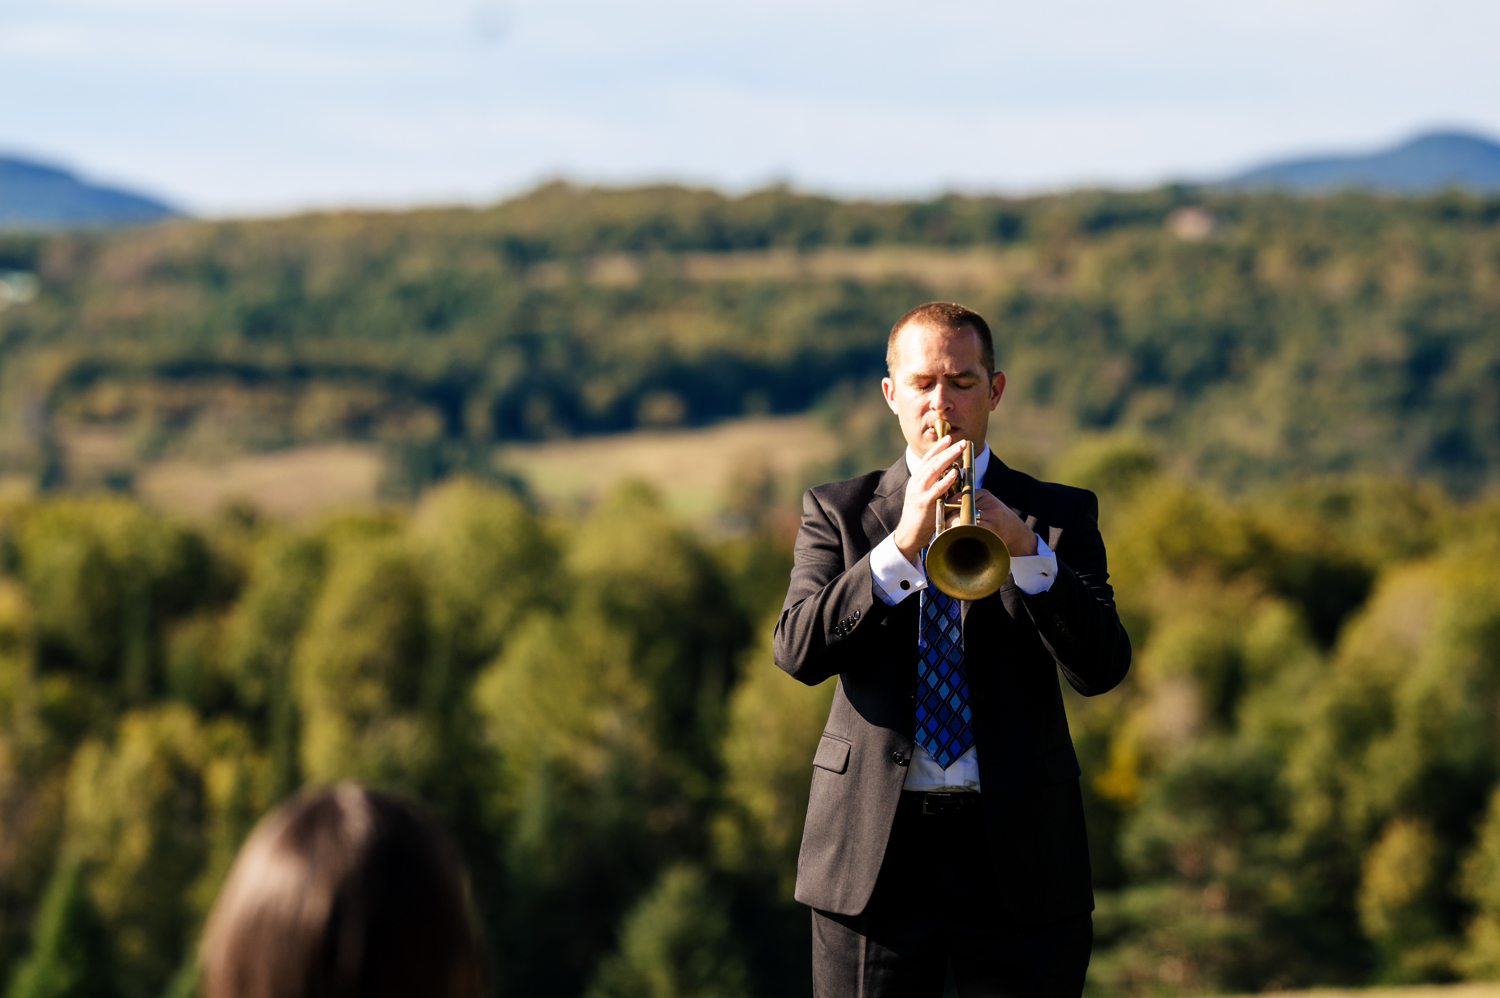 Mountainside trumpet solo during Vermont wedding ceremony.